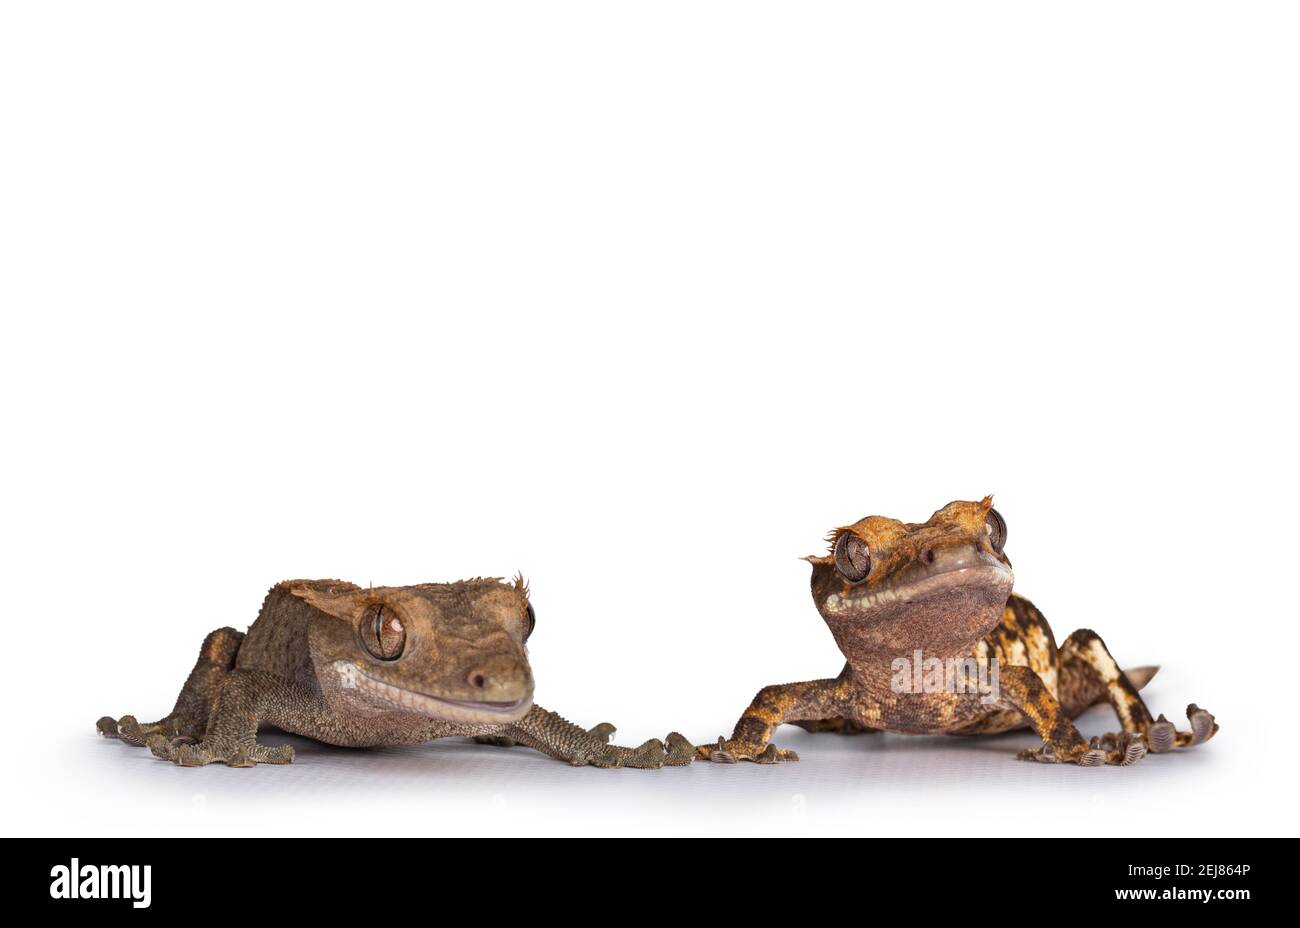 Eye level of two Crested Gecko's aka Correlophus ciliatus. Standing facing front and holding hands. Isolated on white background. Stock Photo